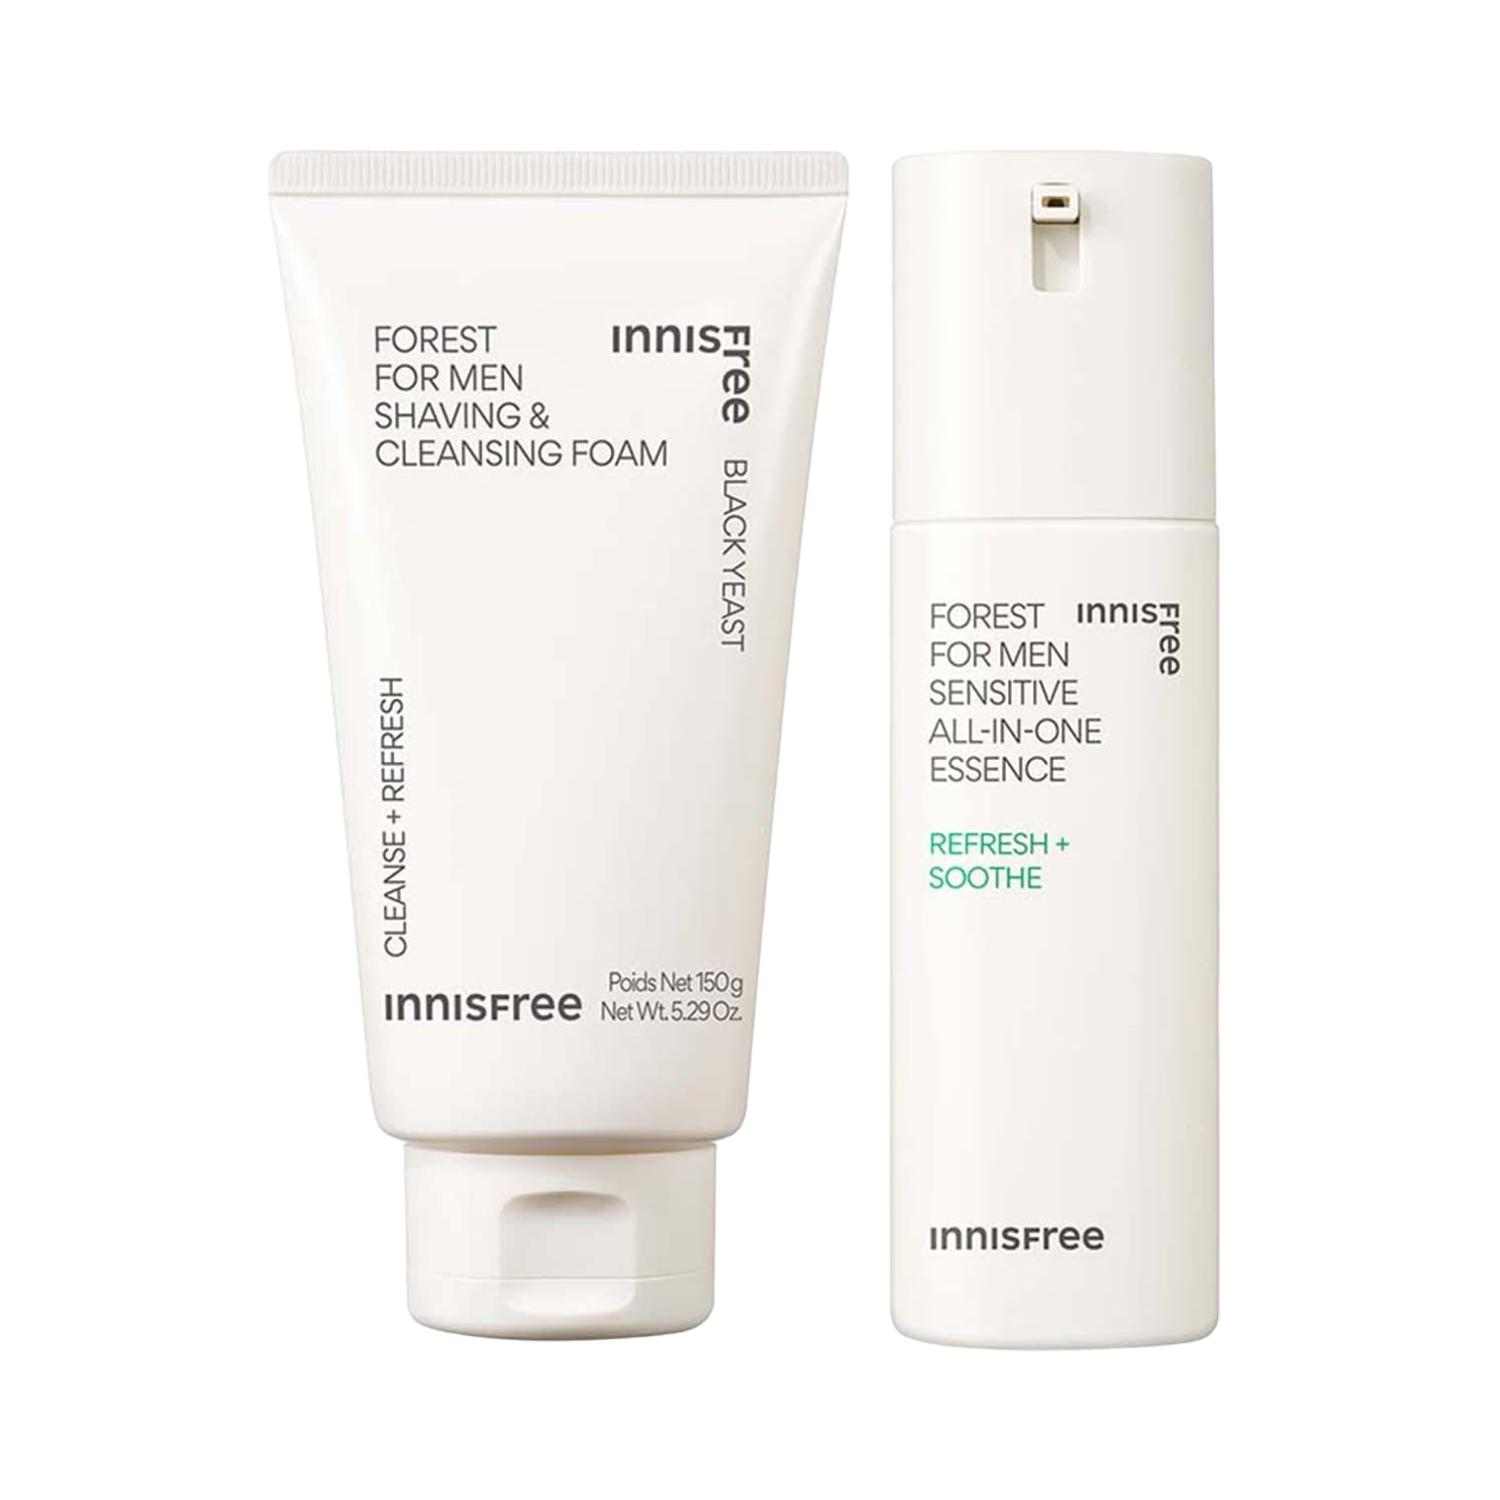 Innisfree | Innisfree Forest Shaving & Cleansing Foam (150 g) & Forest Sensitive All-in-one Essence (100 ml)